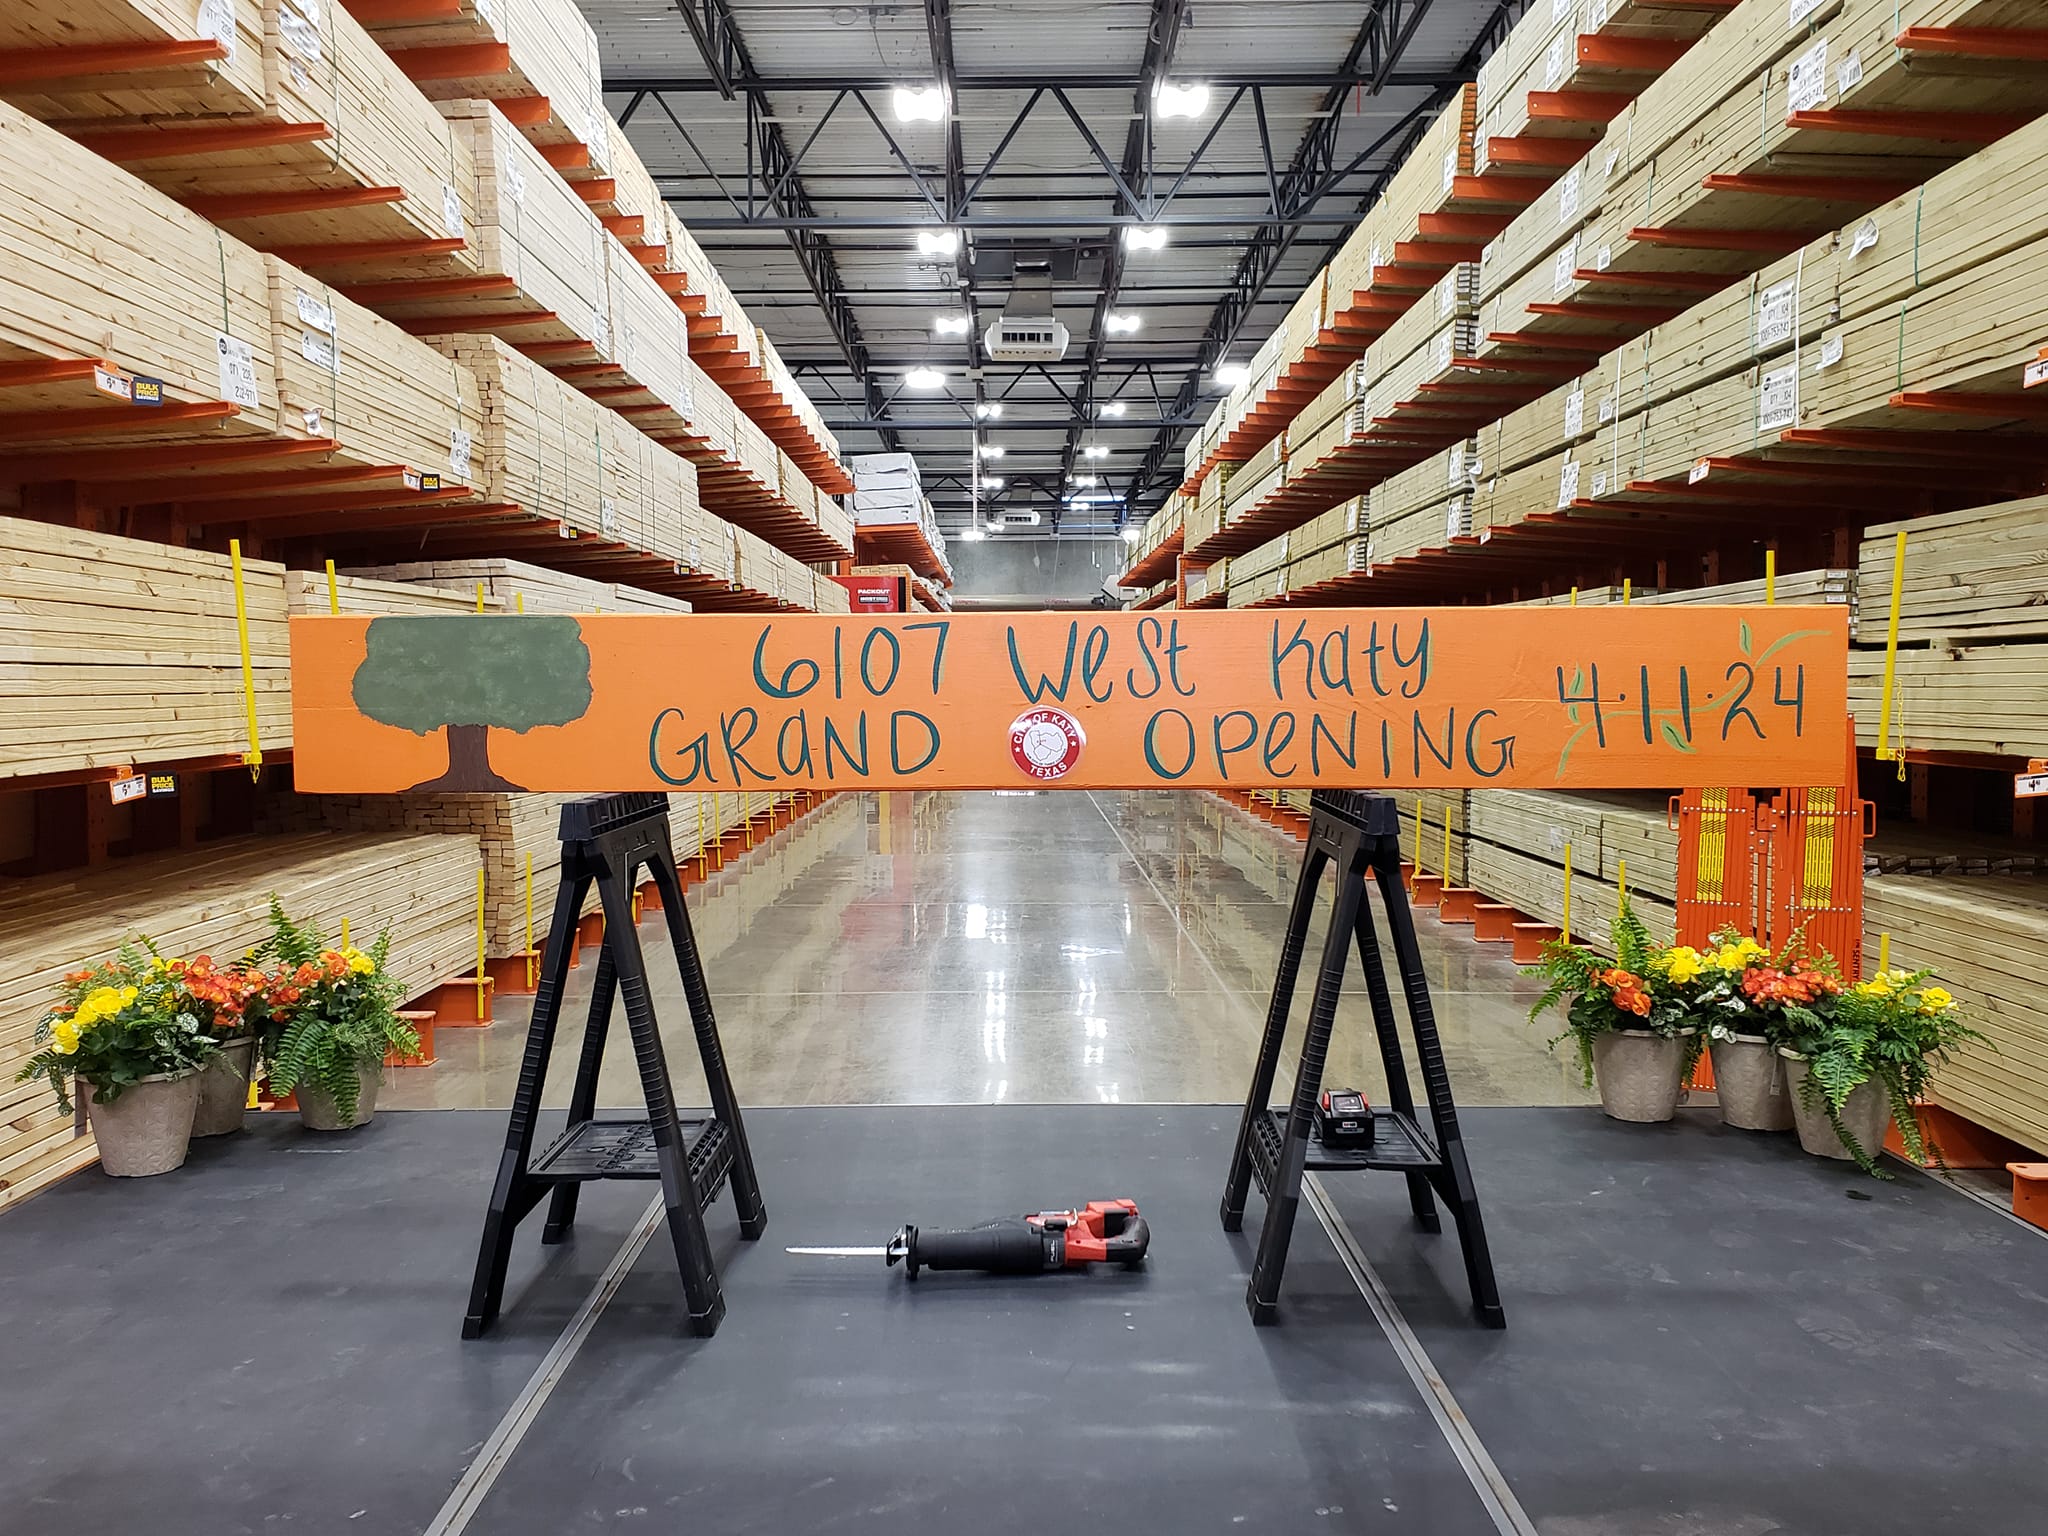 Home Depot Celebrates Grand Opening of New Store in City of Katy